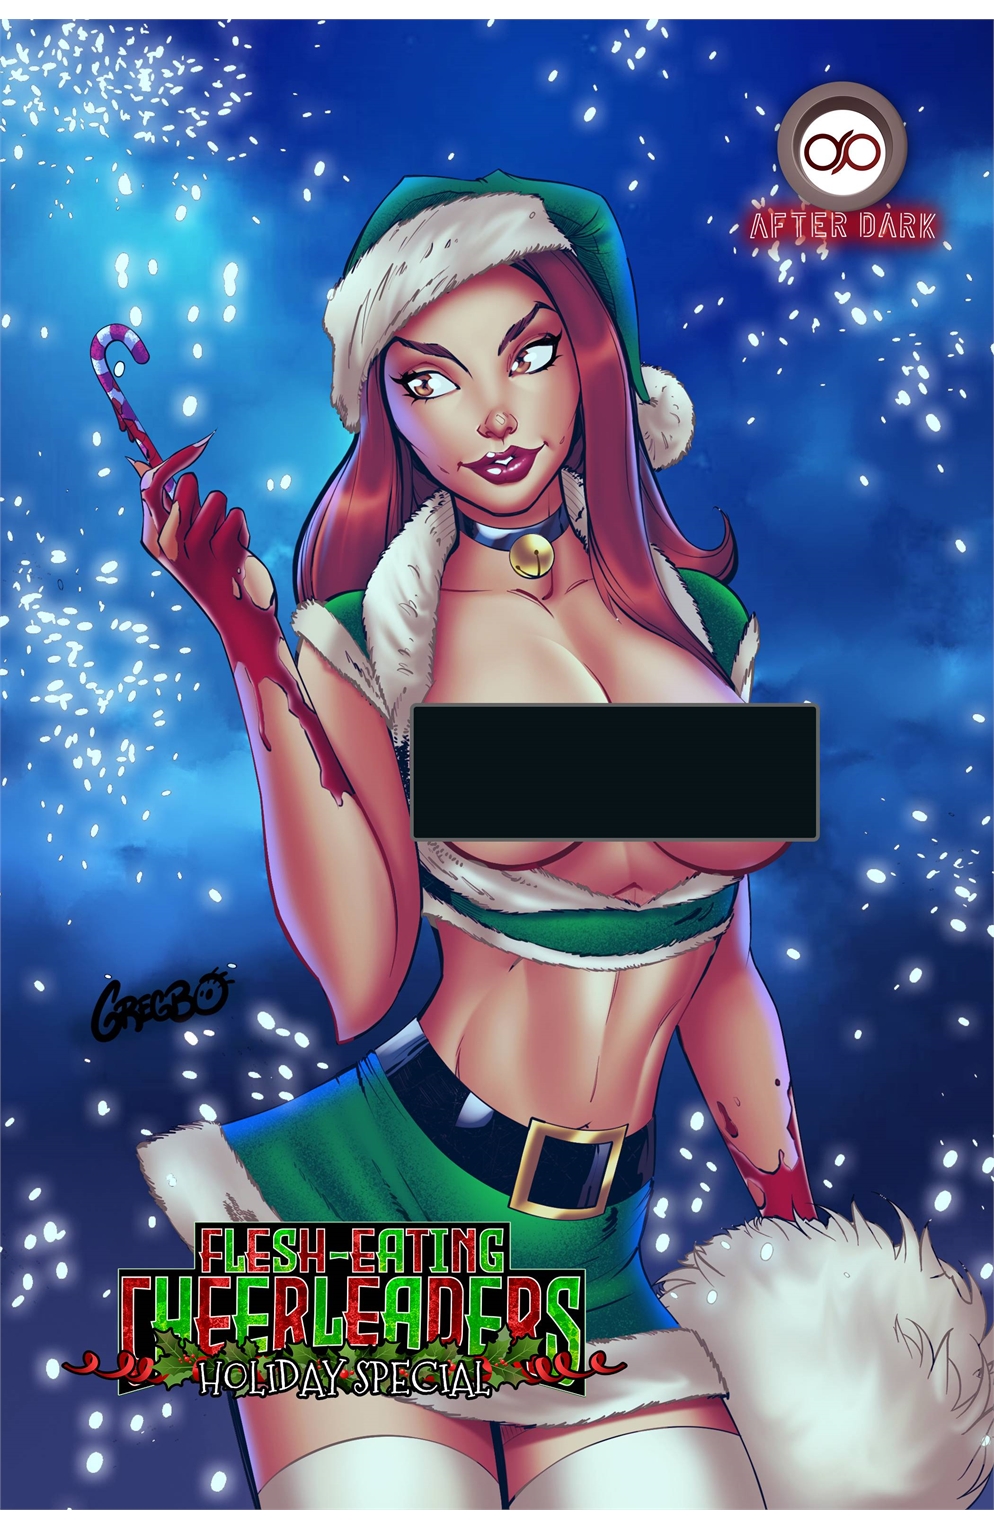 Flesh Eating Cheerleaders Holiday Special Cover D Gregbo Nude (Mature)